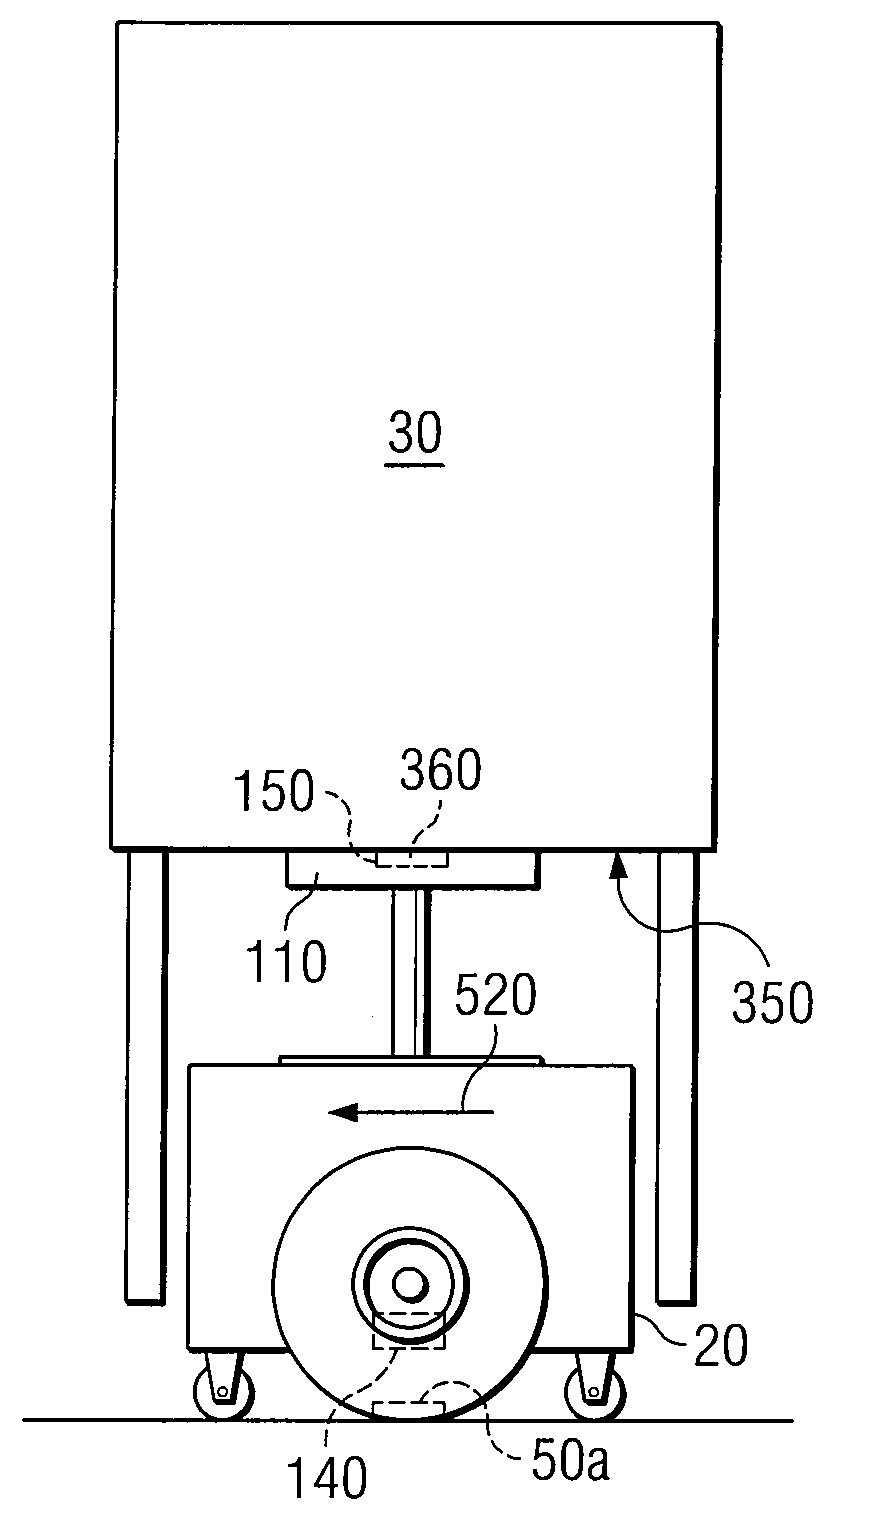 Method and system for transporting inventory items